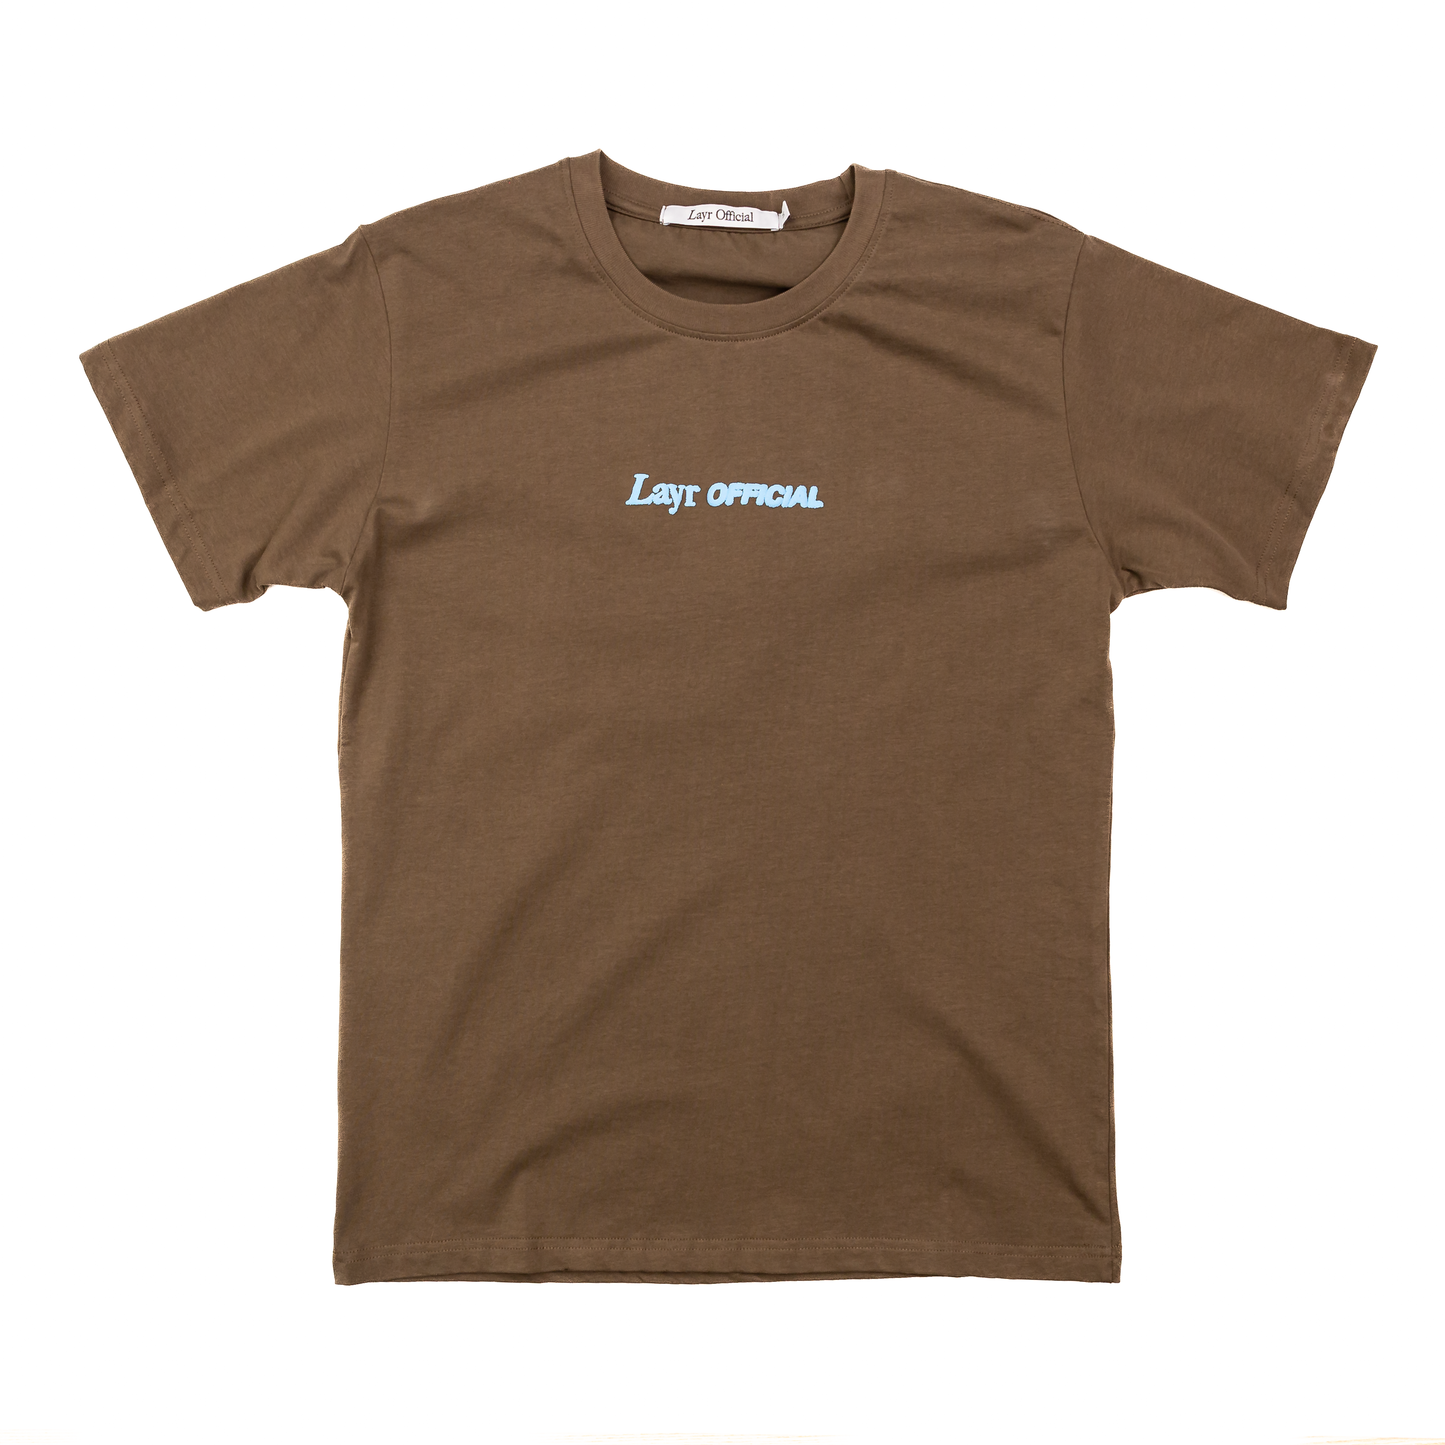 New LO Tee, Washed Brown - Layr Official